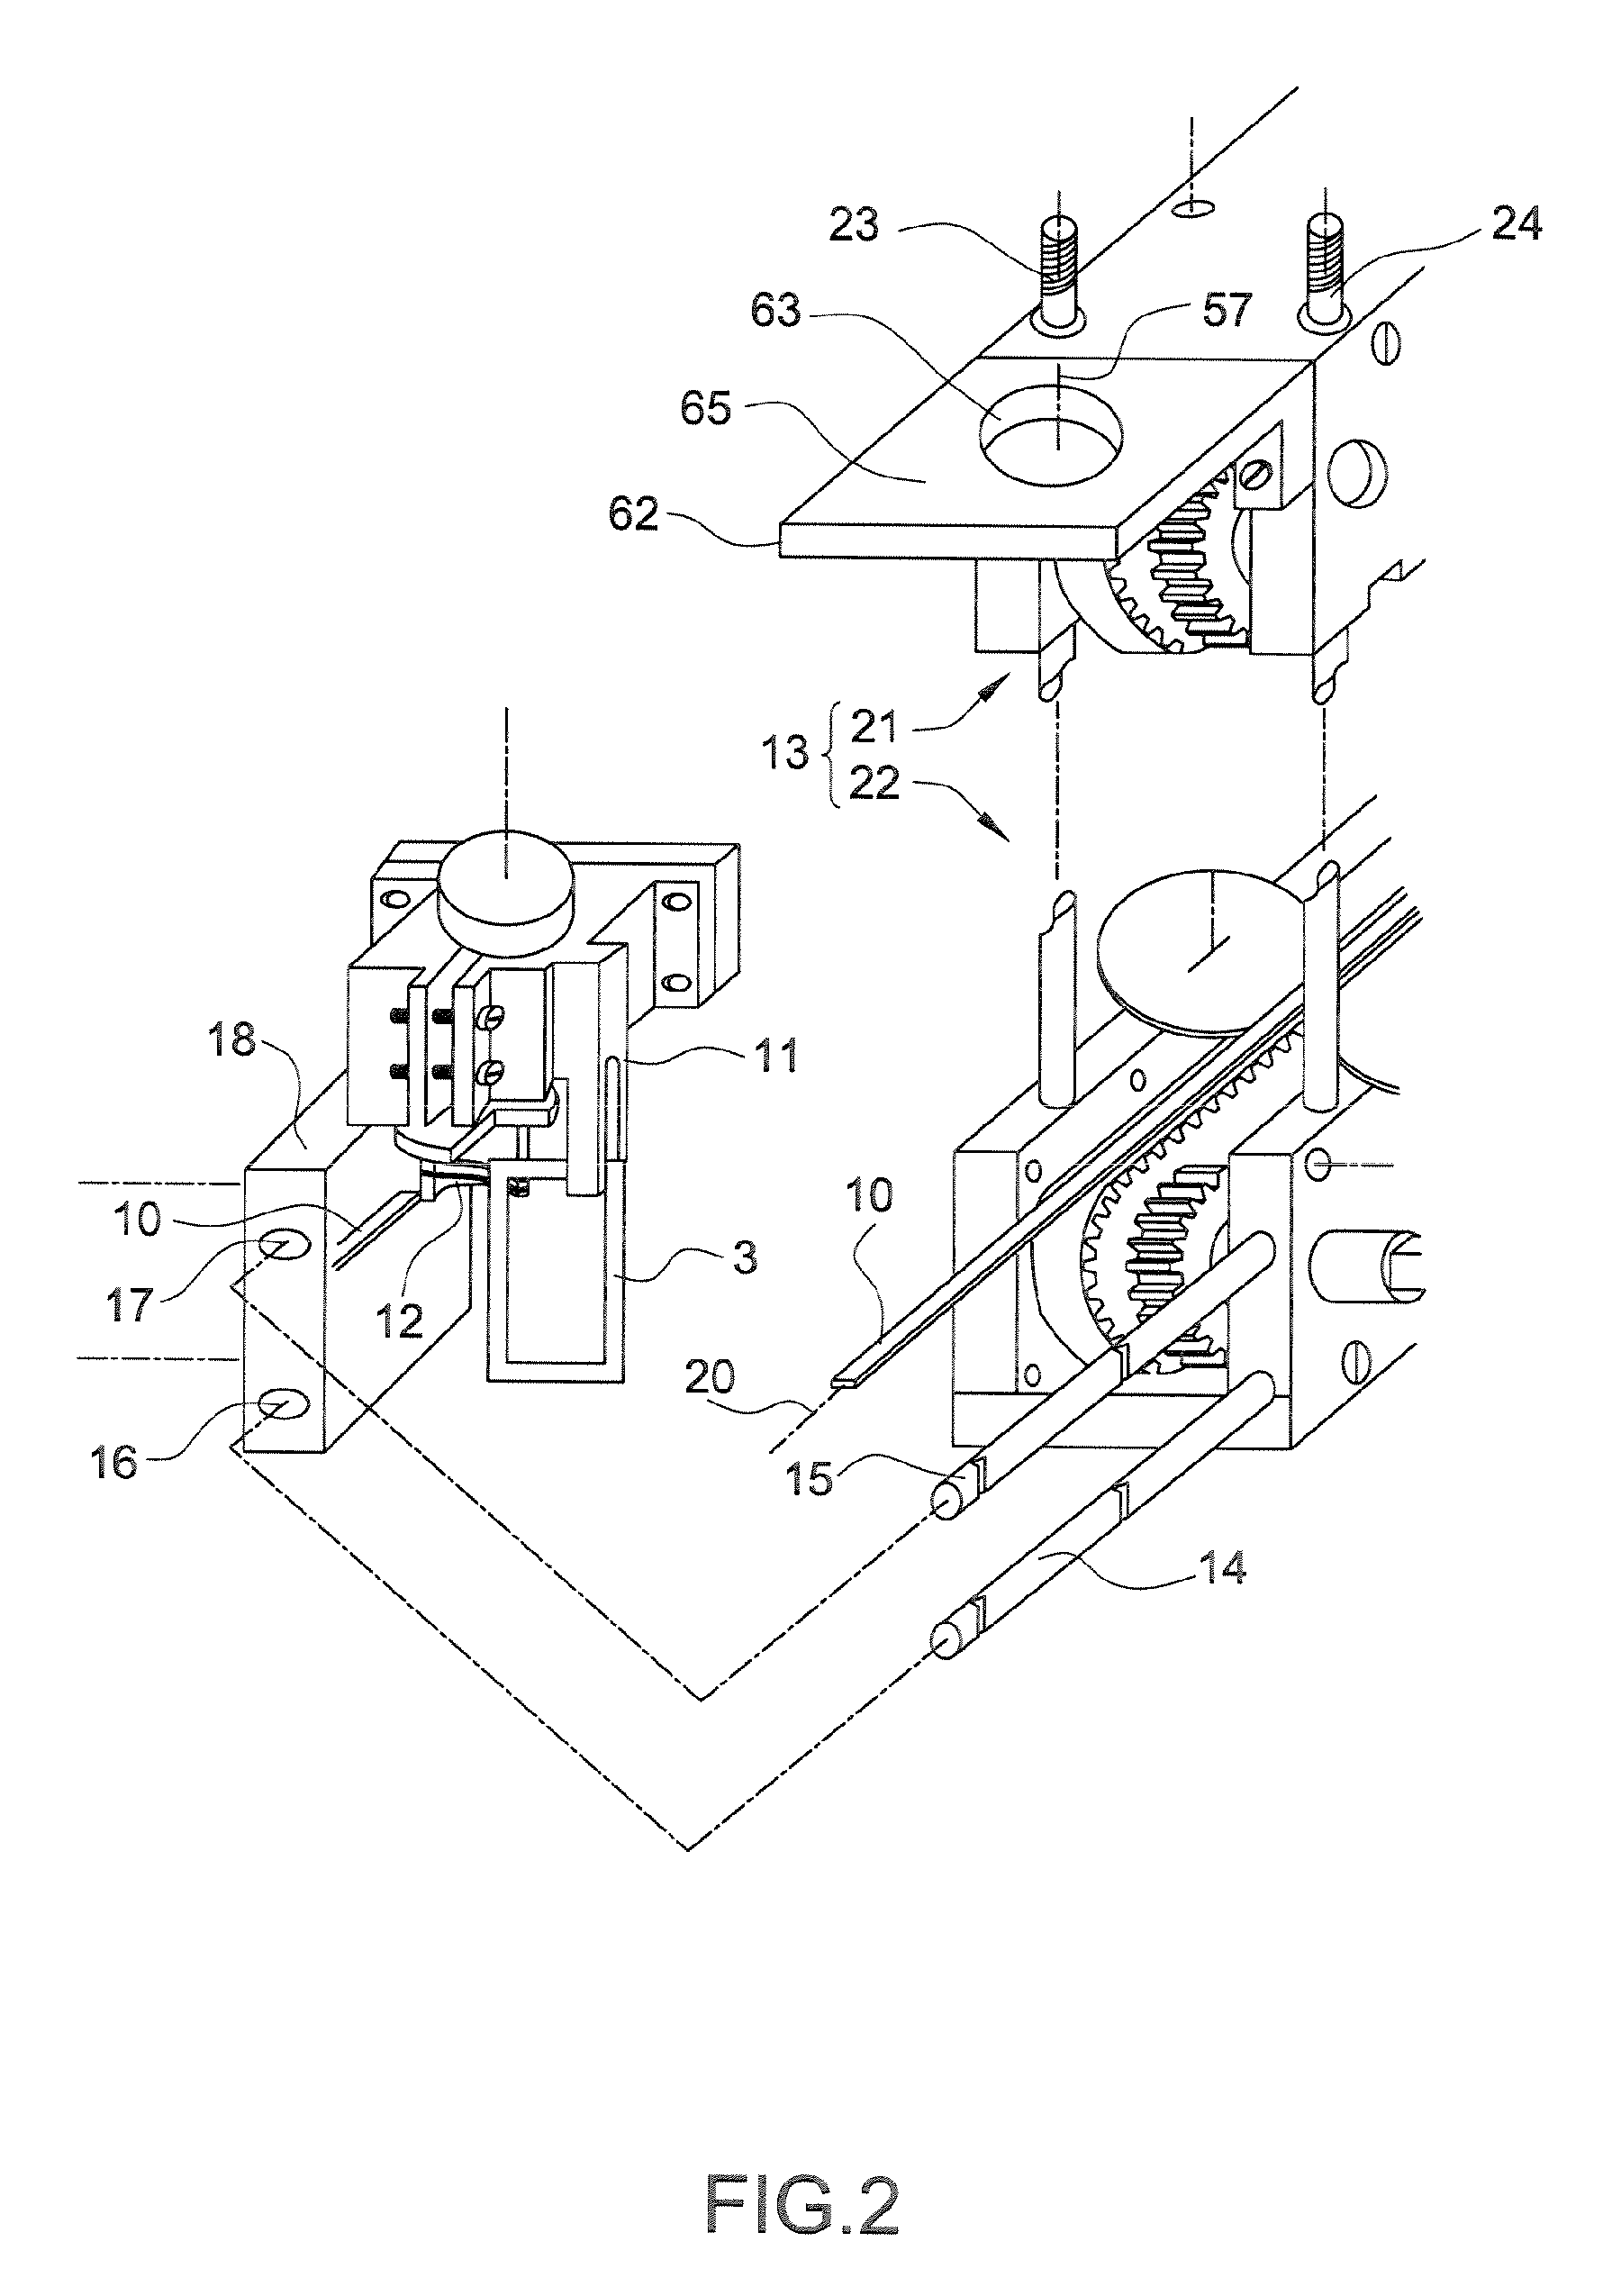 Device and method for winding a coil of rigid wire around a ring core